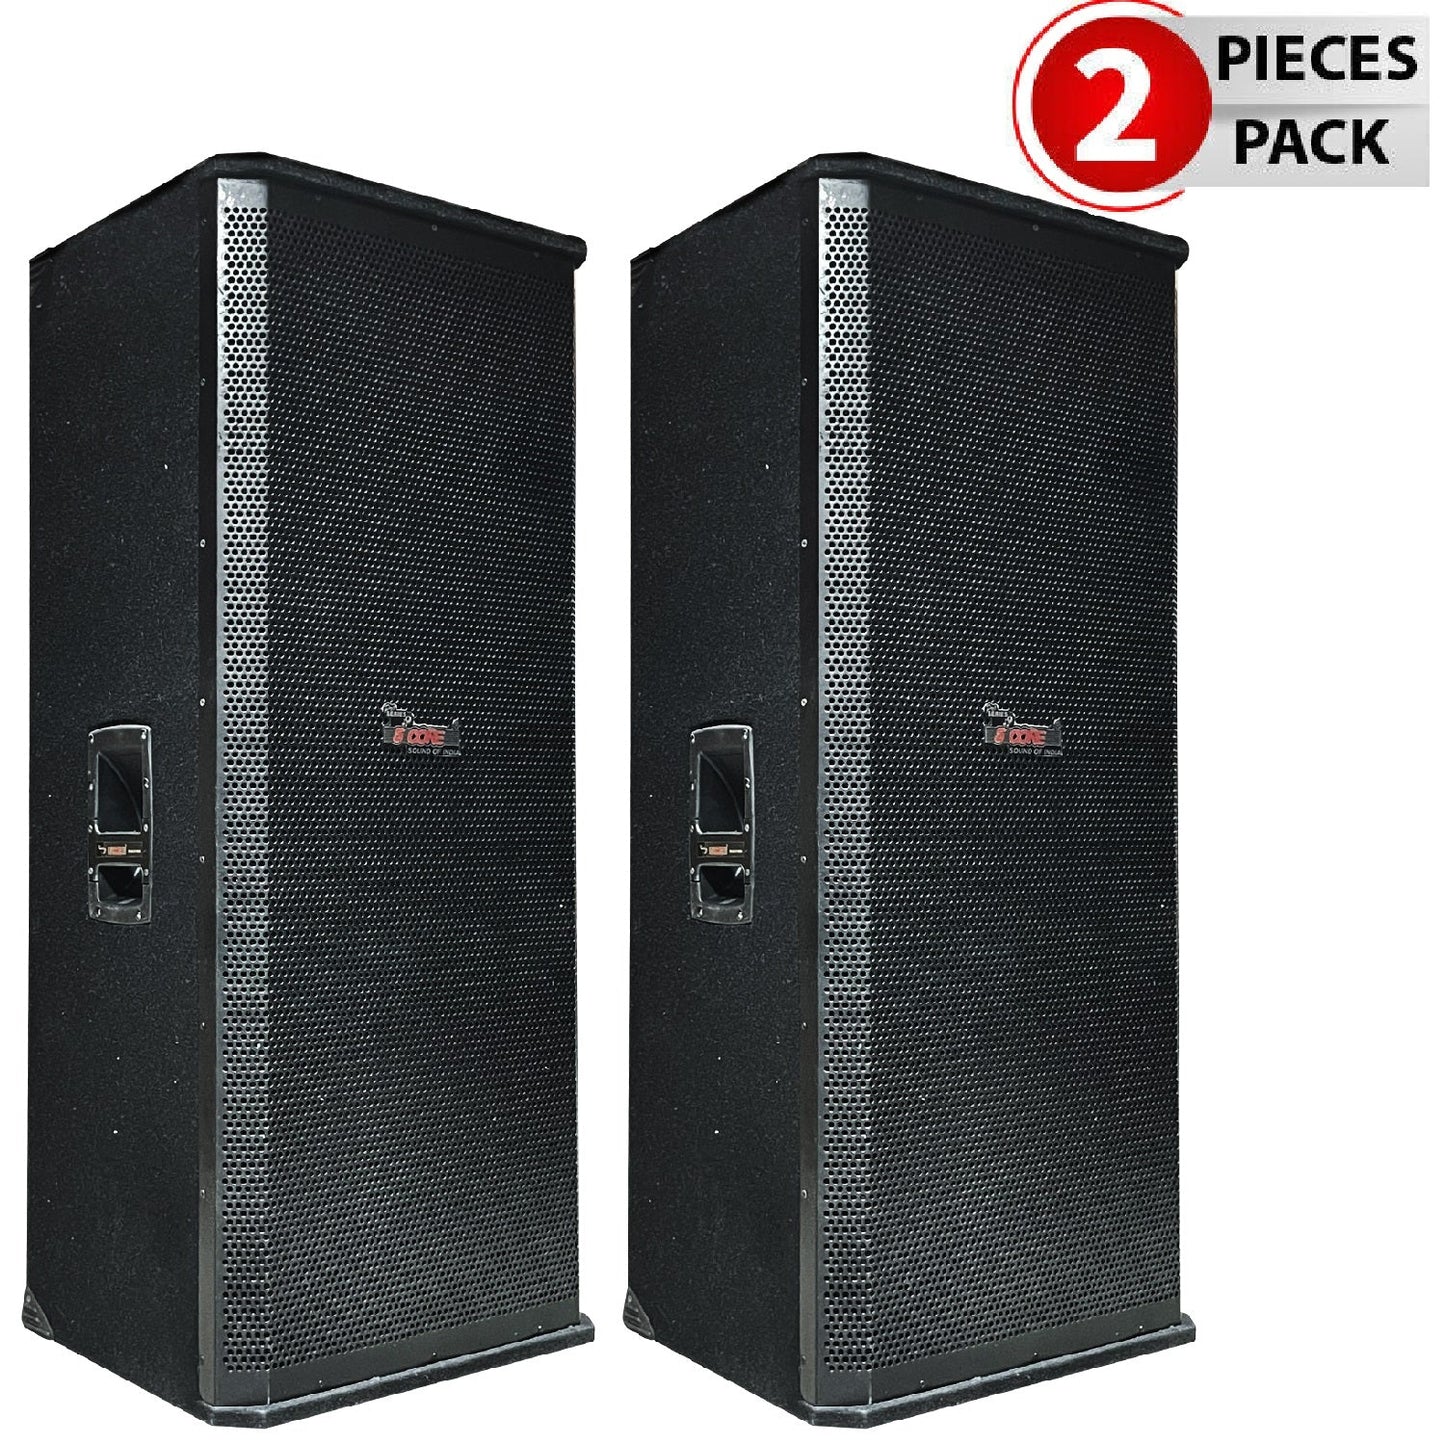 5 Core 2 Pieces DJ Speakers 15 inch Outdoor Speaker System Pro Pa Party Monitor Speaker PMPO Wooden 15X2 1250 FX CPT 2PCS-1